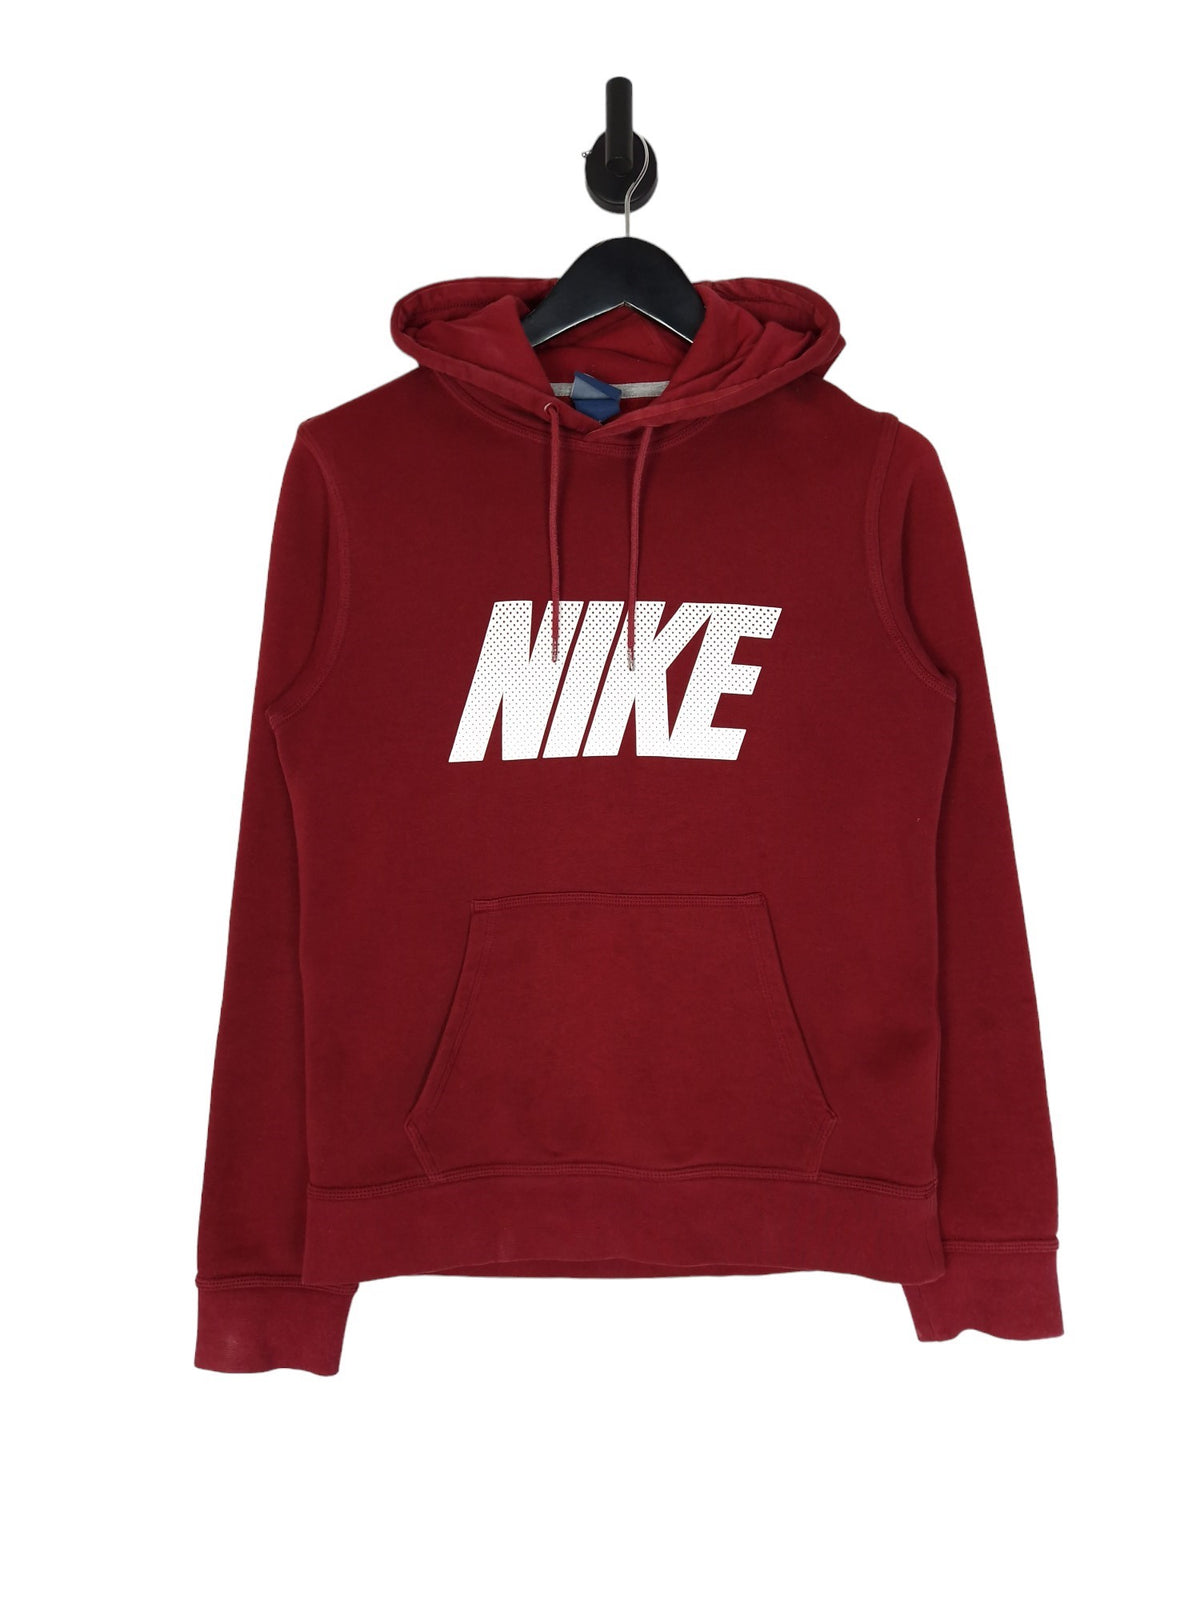 Nike Spell Out Hoodie - Size Small